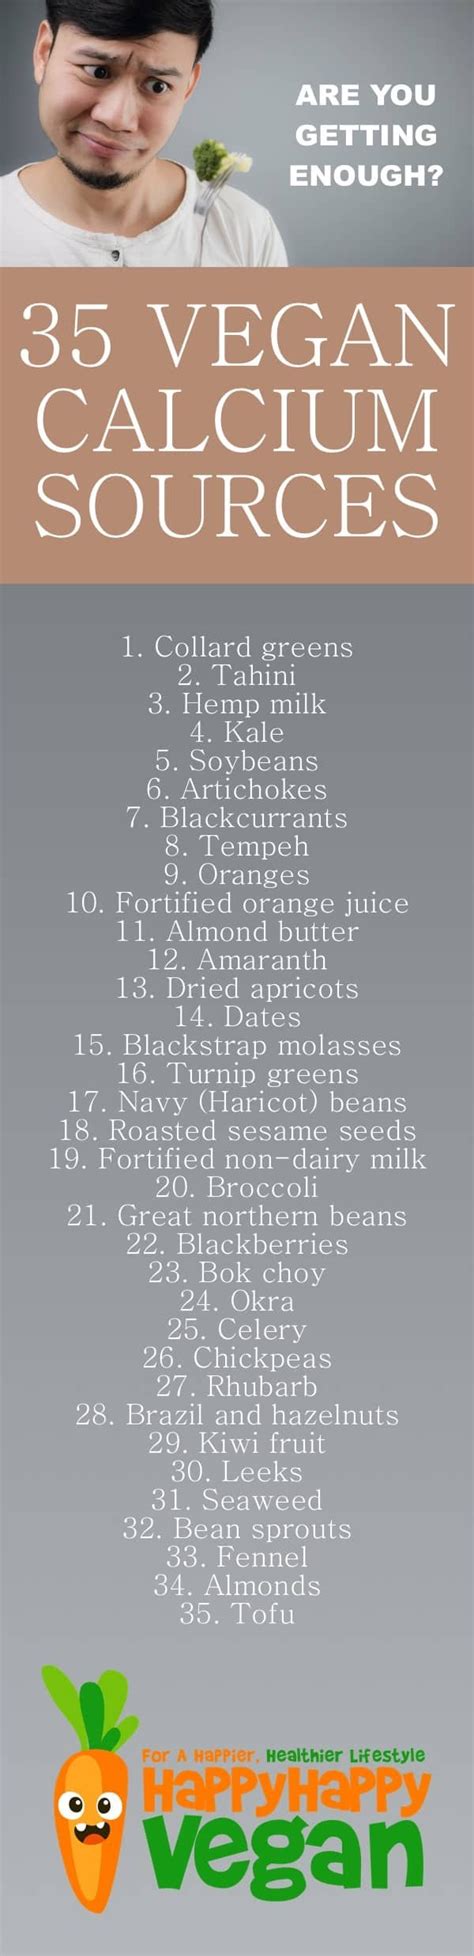 35 Vegan Calcium Sources Are You Getting What You Need